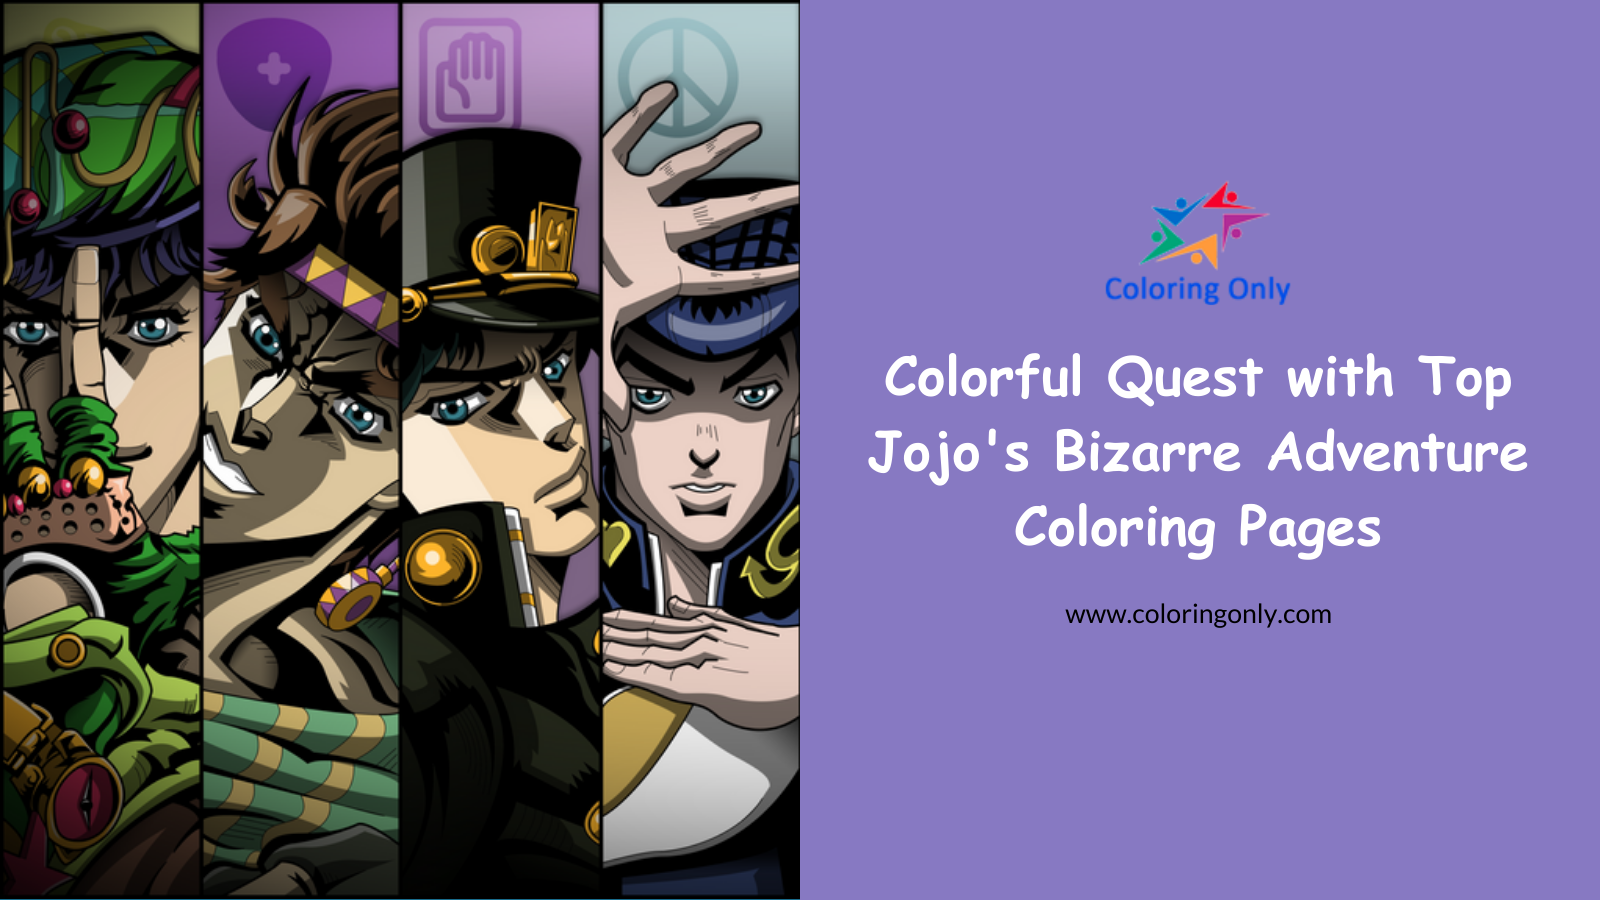 Colorful Quest with Top Jojo's Bizarre Adventure Coloring Pages